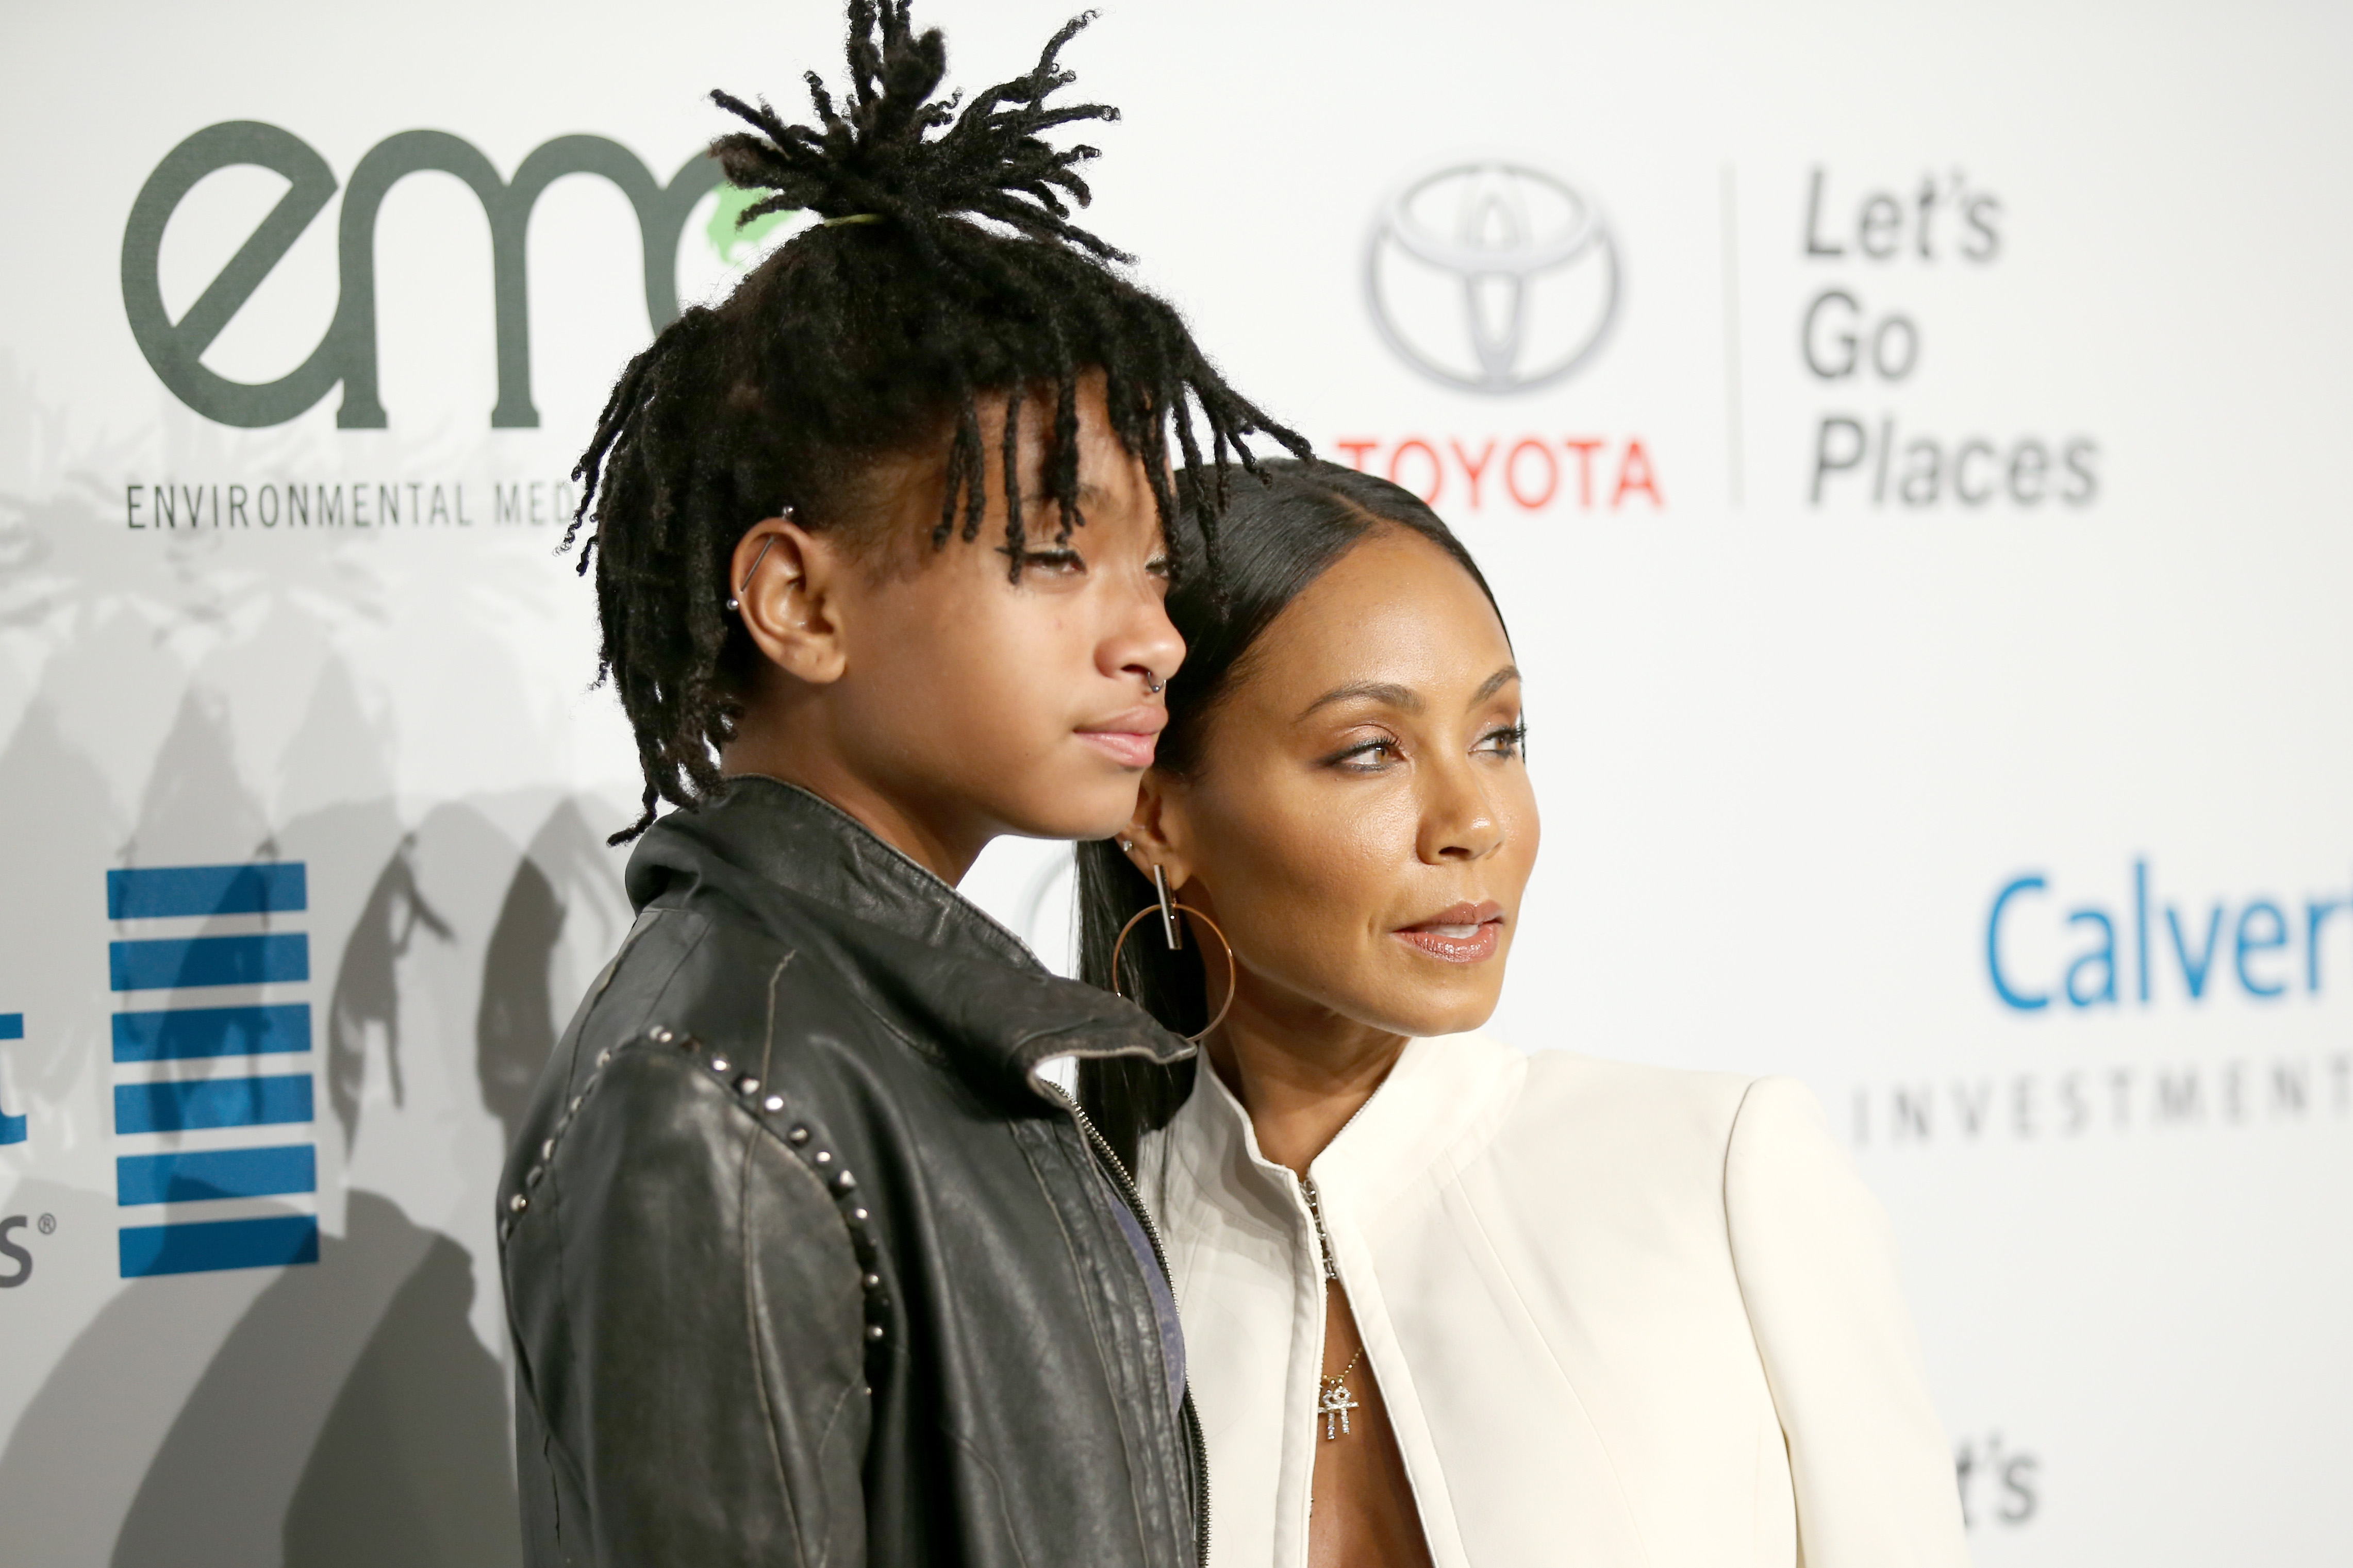 Singer Willow Smith and actress Jada Pinkett Smith attend the Environmental Media Association 26th Annual EMA Awards Presented By Toyota, Lexus And Calvert at Warner Bros. Studios on October 22, 2016 in Burbank, California.